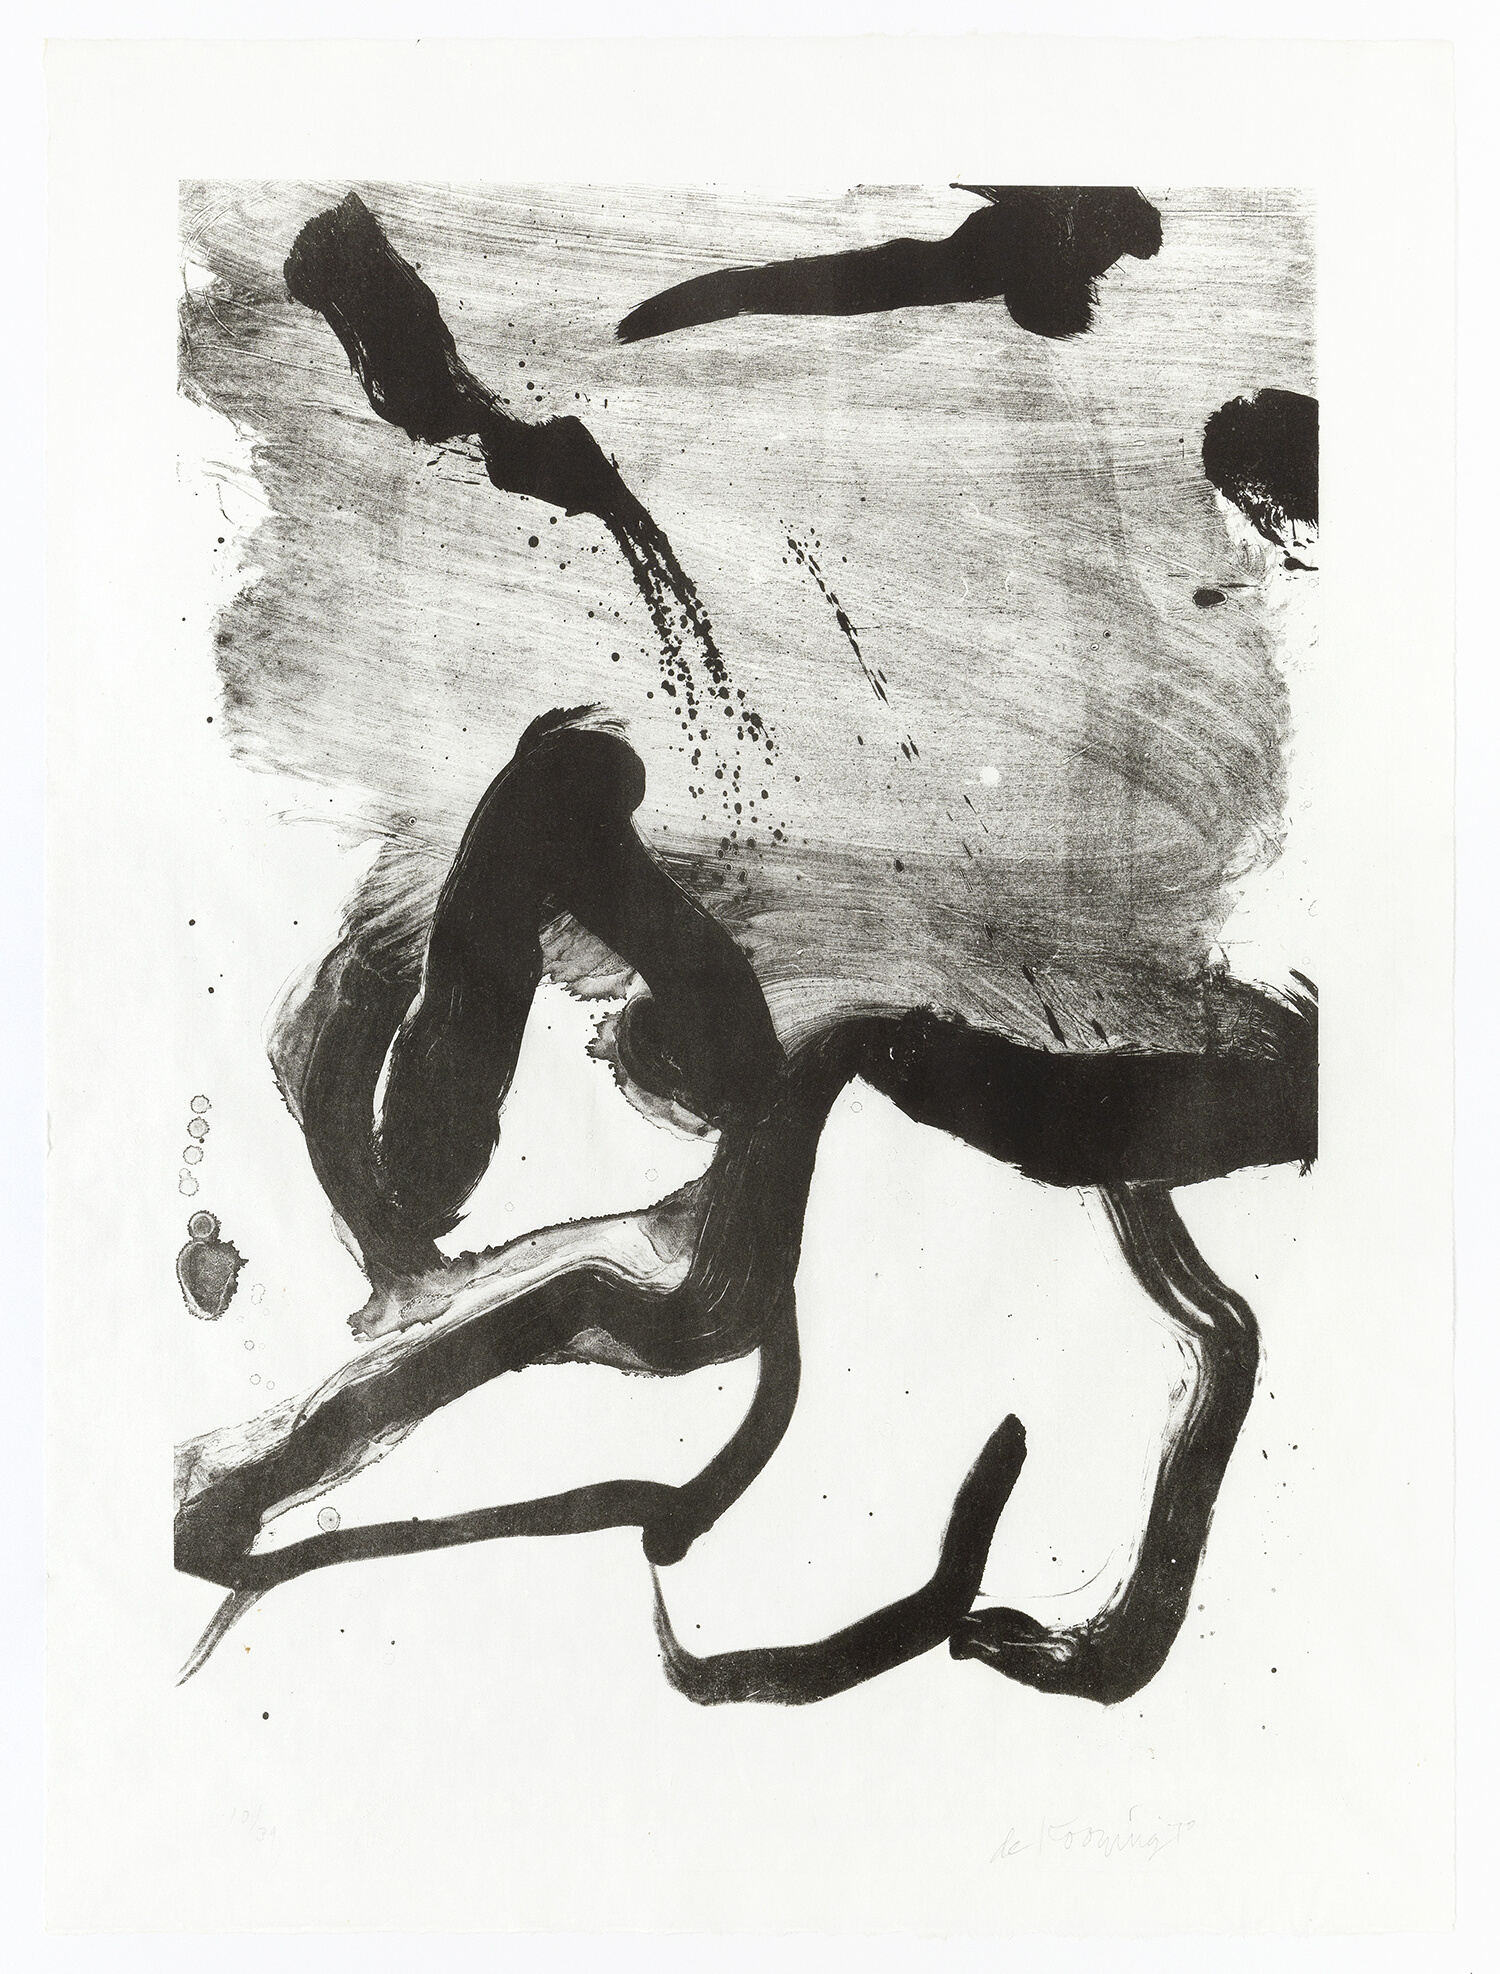 Willem de Kooning Beach Scene, 1971 Lithograph 31 1/2 x 23 inches (80 x 58.4 cm) Edition of 39